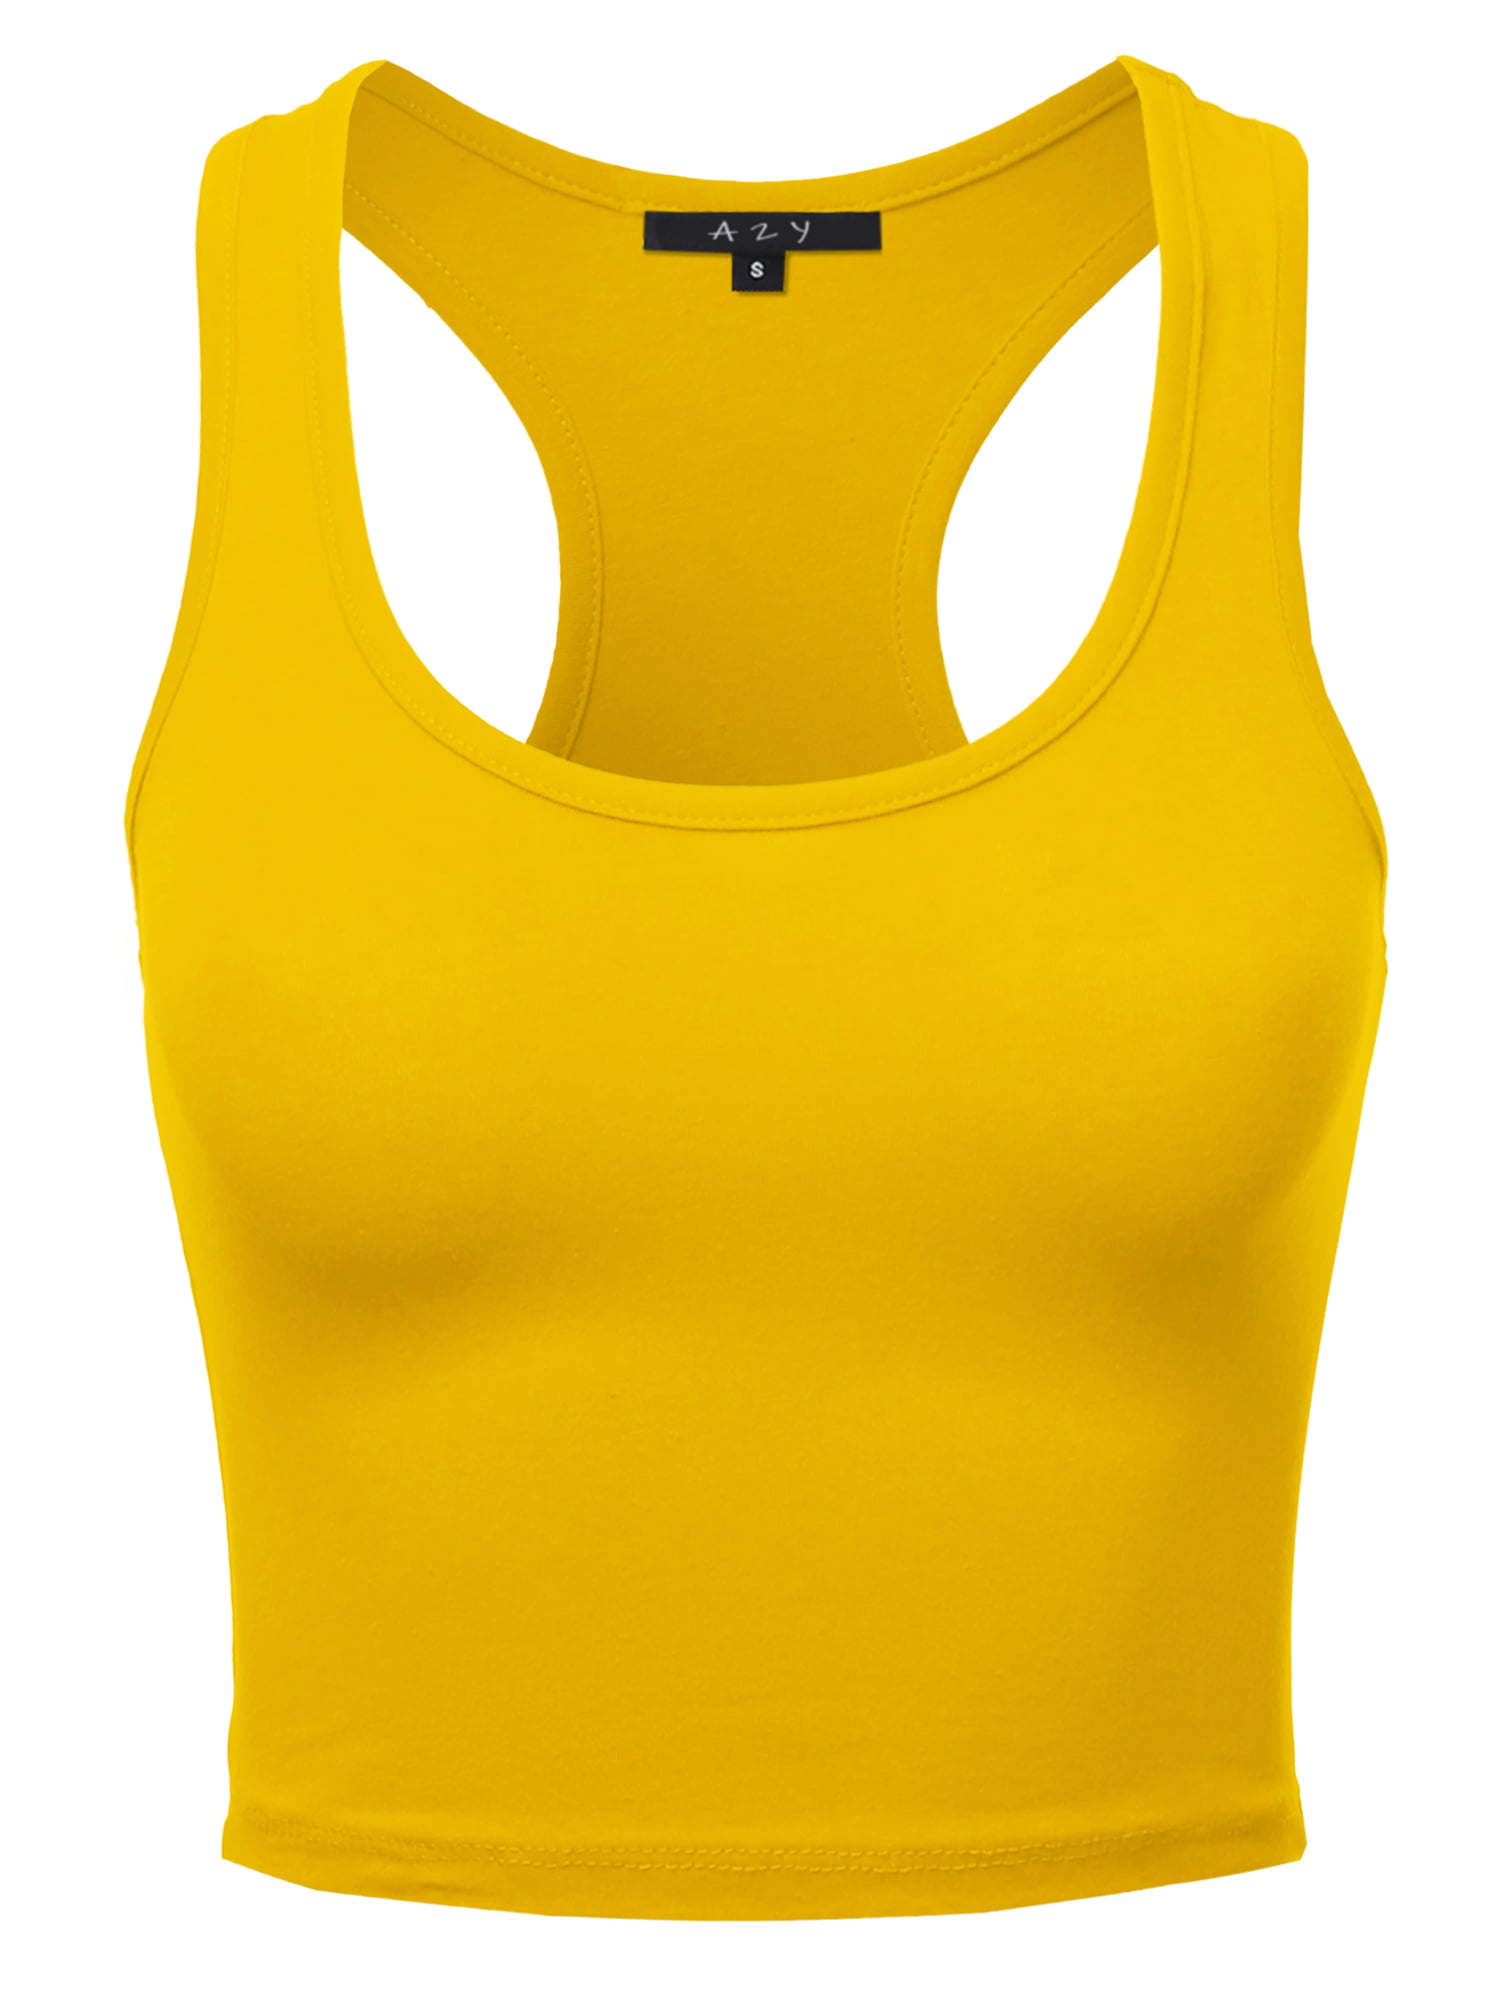 Inspiration Fredag Forkert A2Y Women's Basic Cotton Casual Scoop Neck Sleeveless Cropped Racerback Tank  Tops Yellow S - Walmart.com